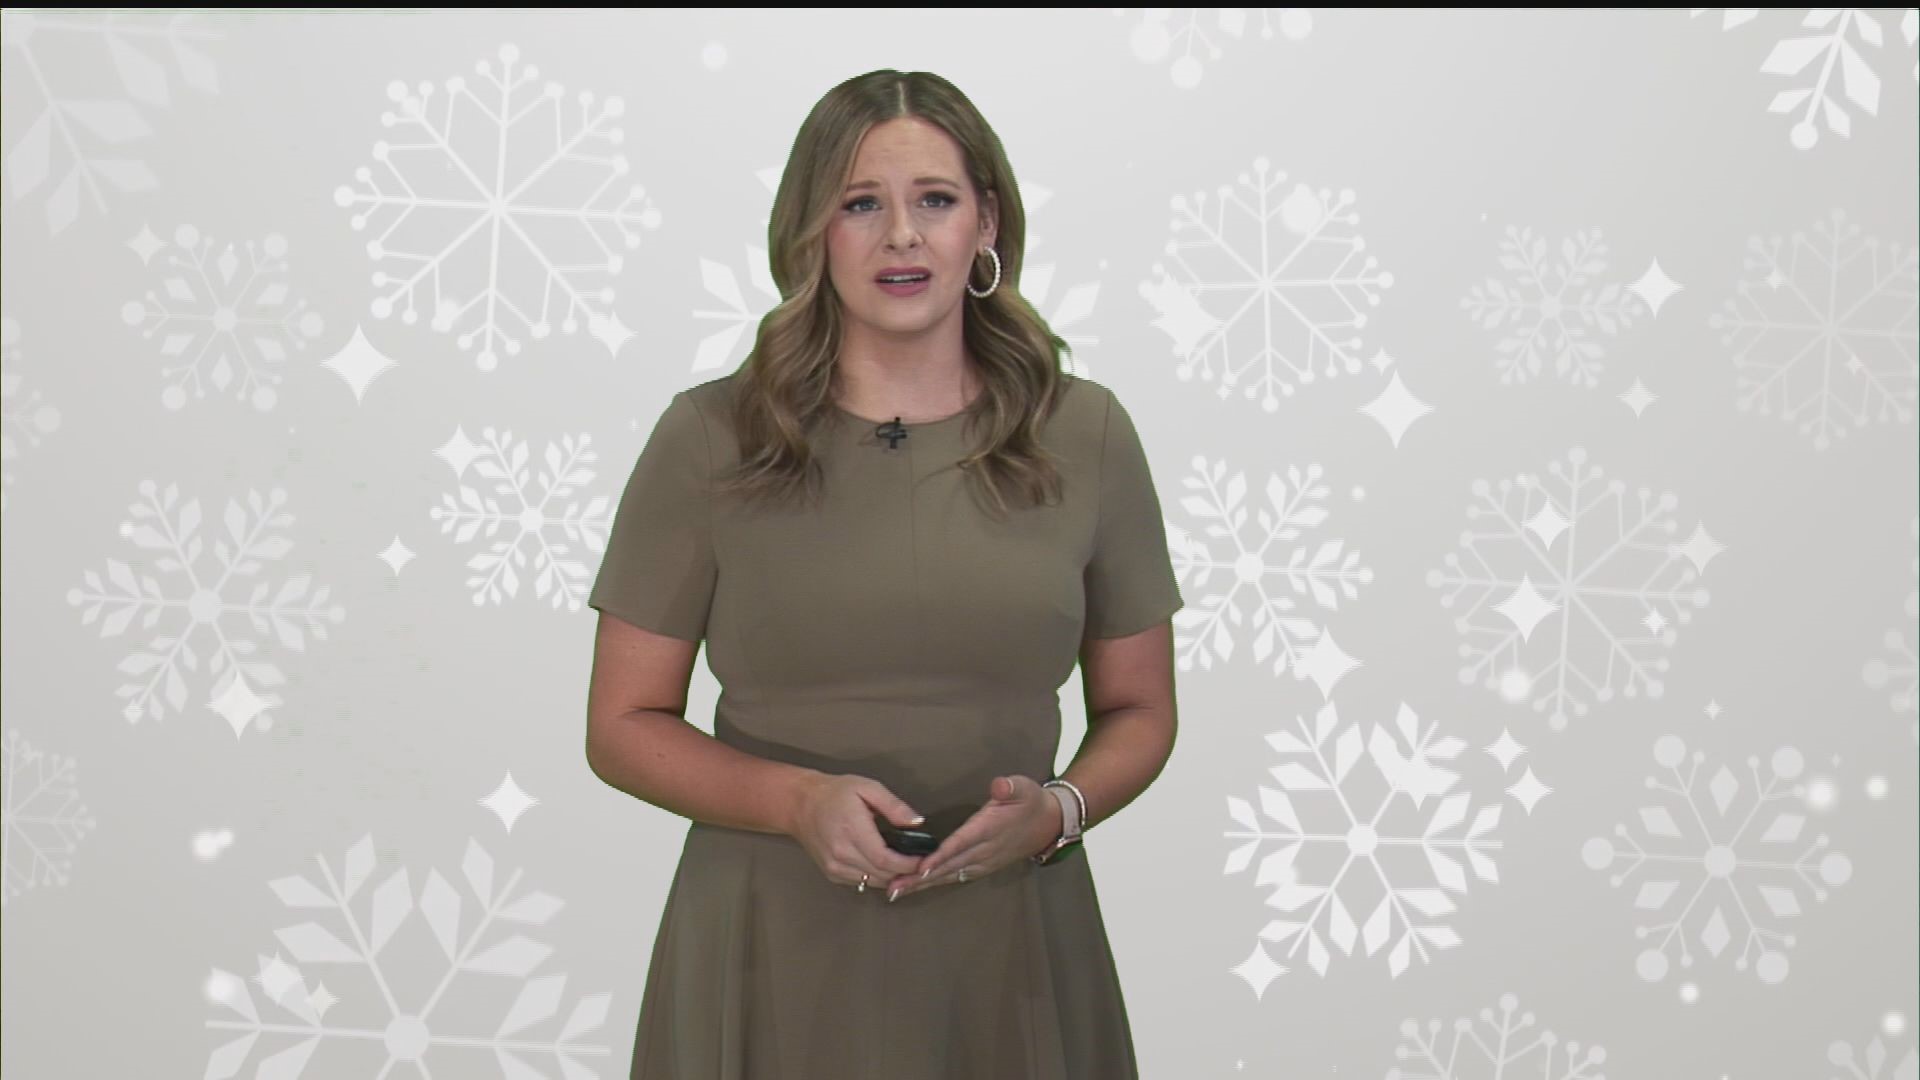 Stacey Spivey reminds us to enjoy the snow, but to be careful if we go out in it.